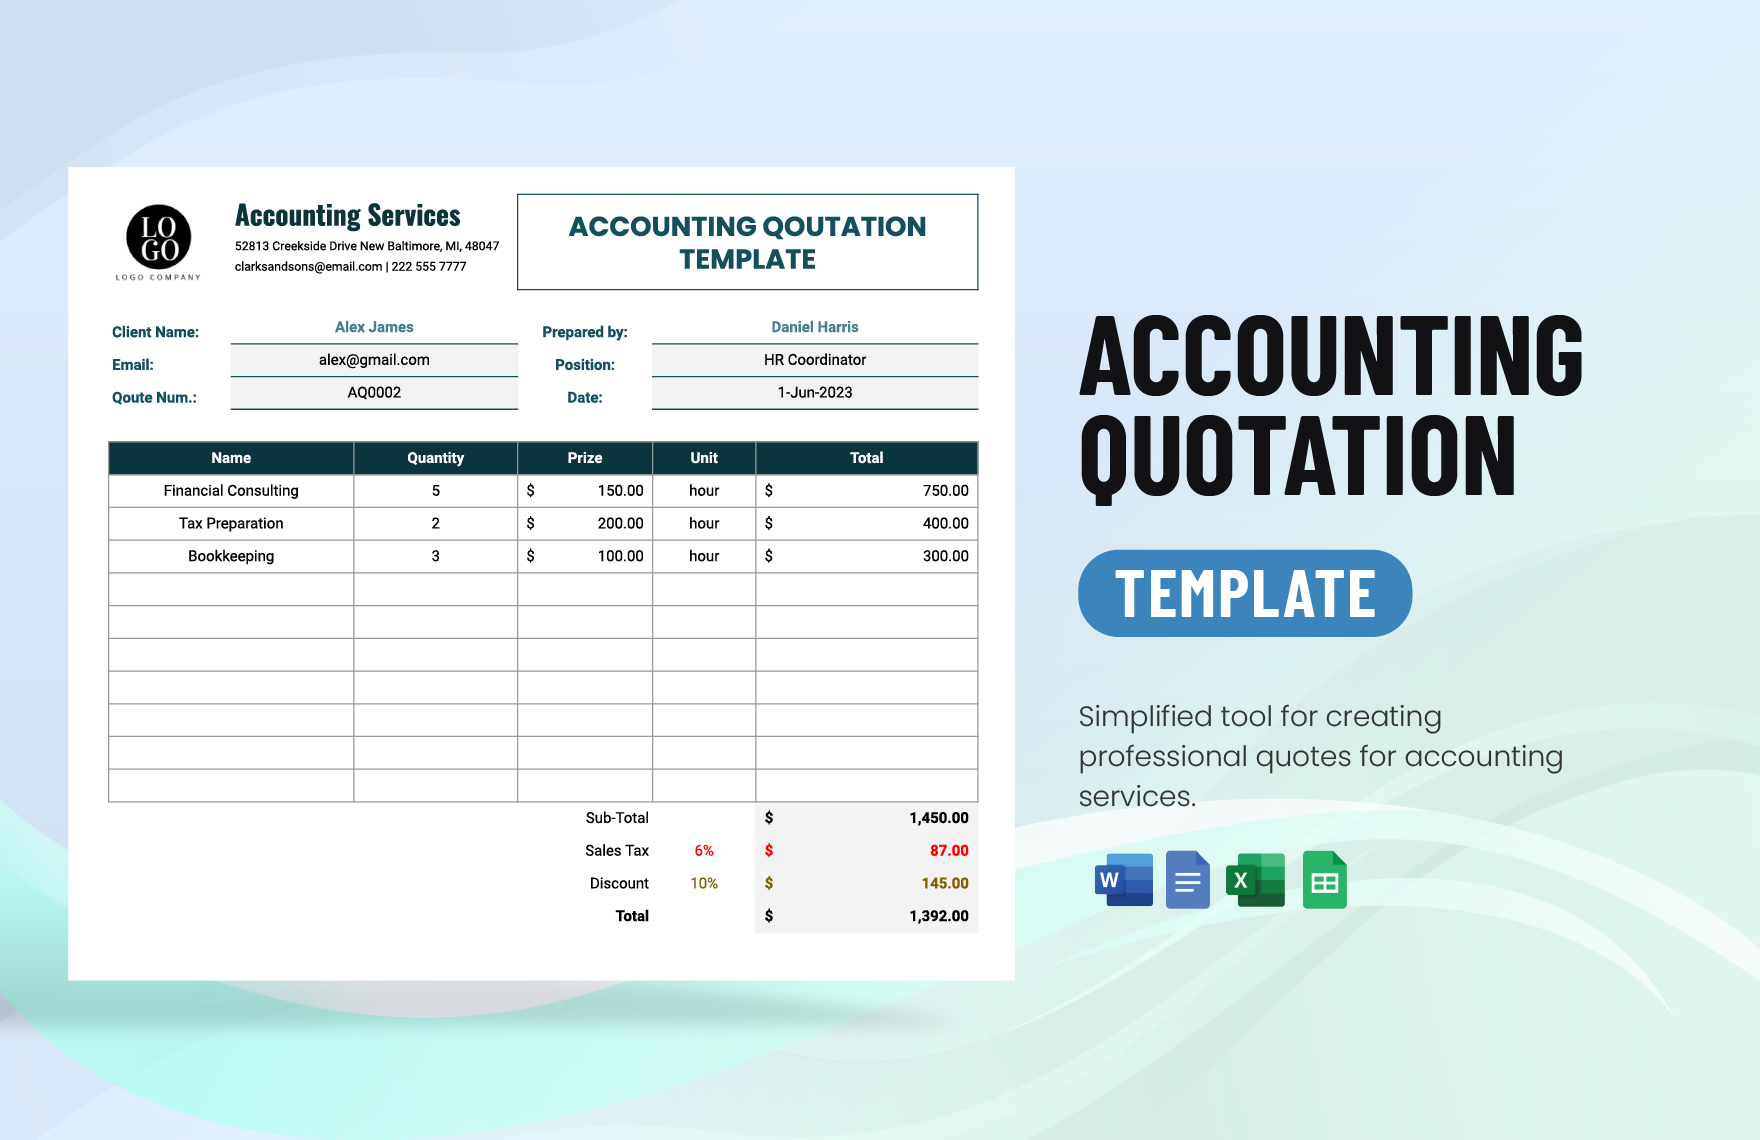 Free Accounting Quotation Template in Word, Google Docs, Excel, Google Sheets, PSD